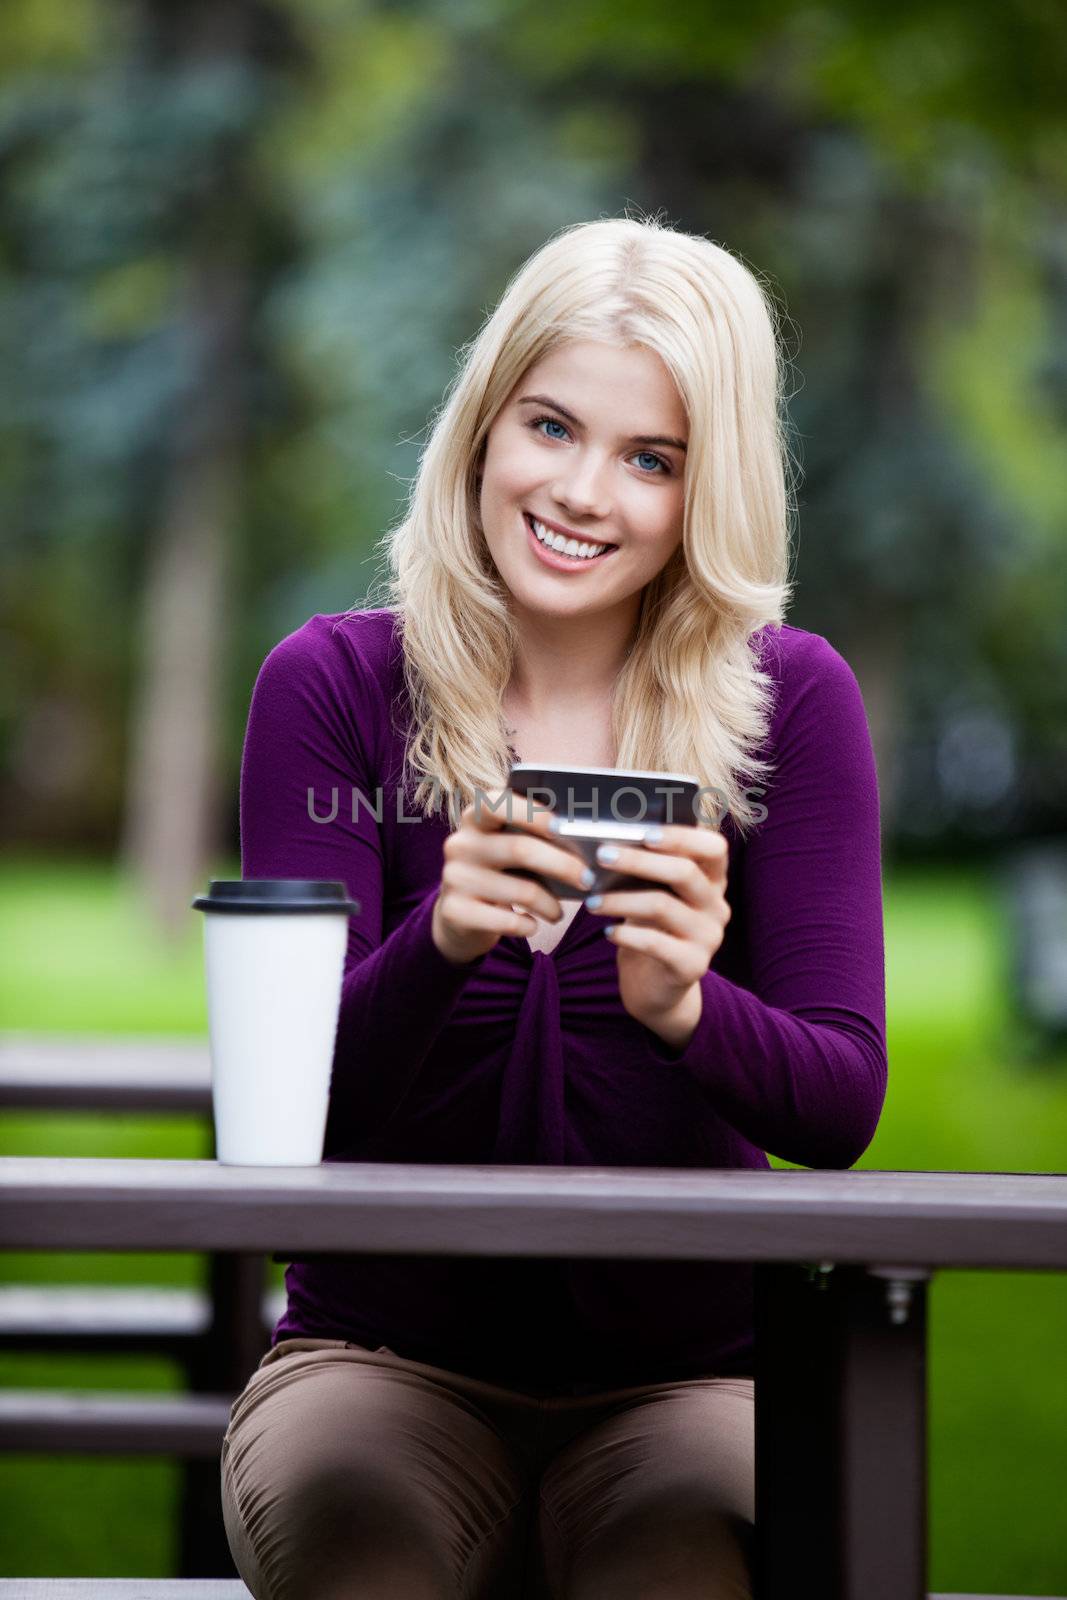 Portrait of Young Woman with Cell Phone by leaf